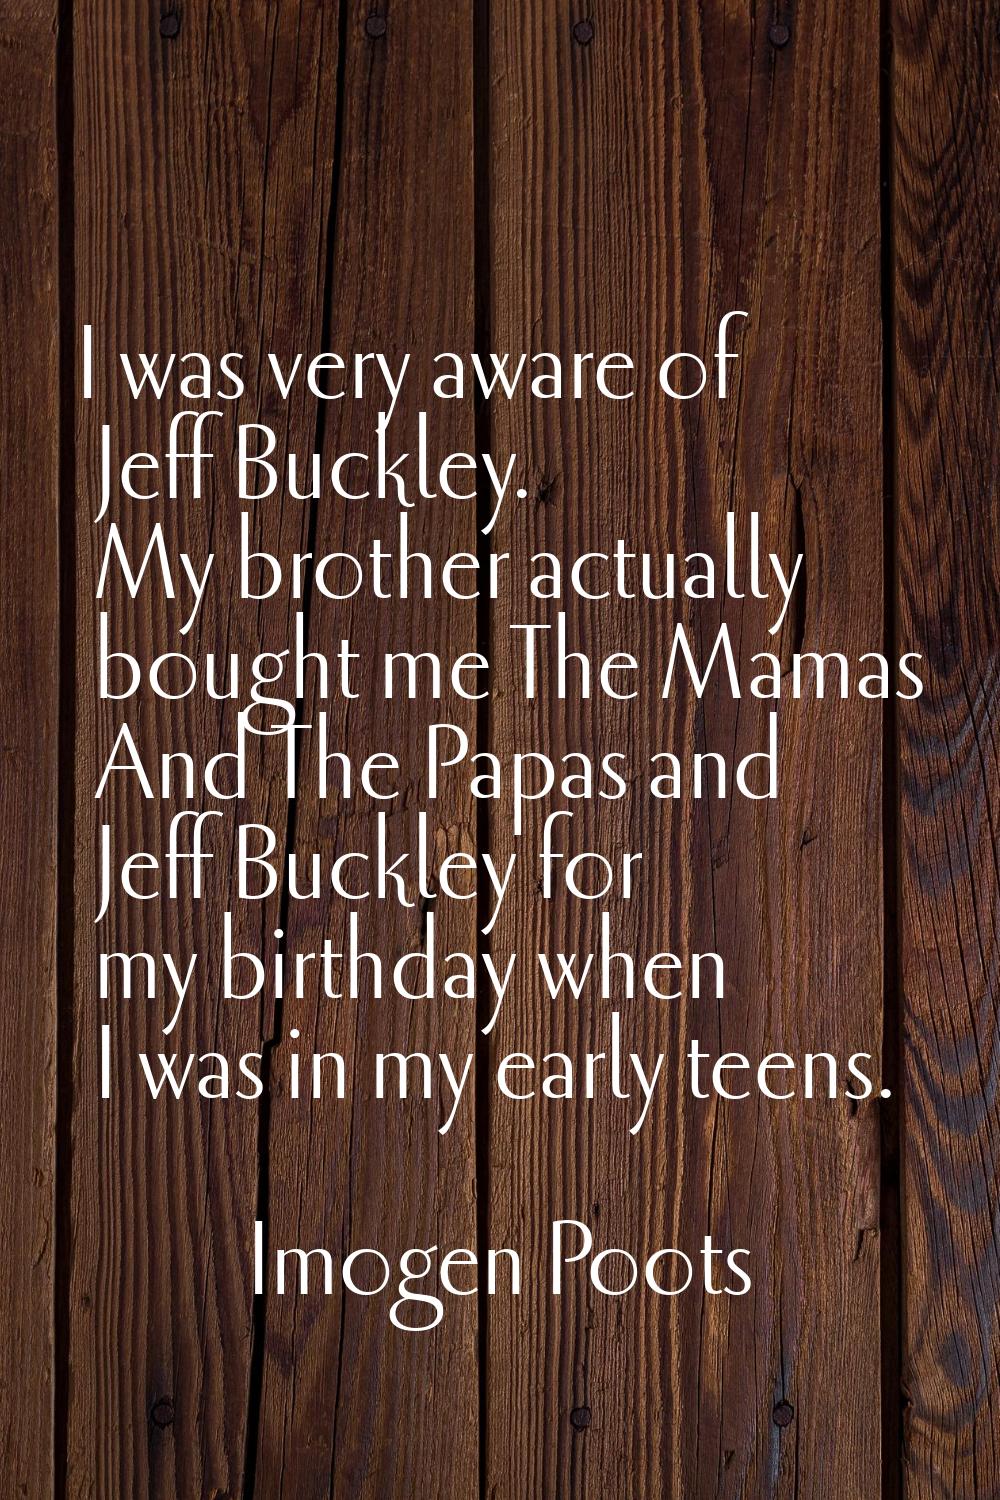 I was very aware of Jeff Buckley. My brother actually bought me The Mamas And The Papas and Jeff Bu